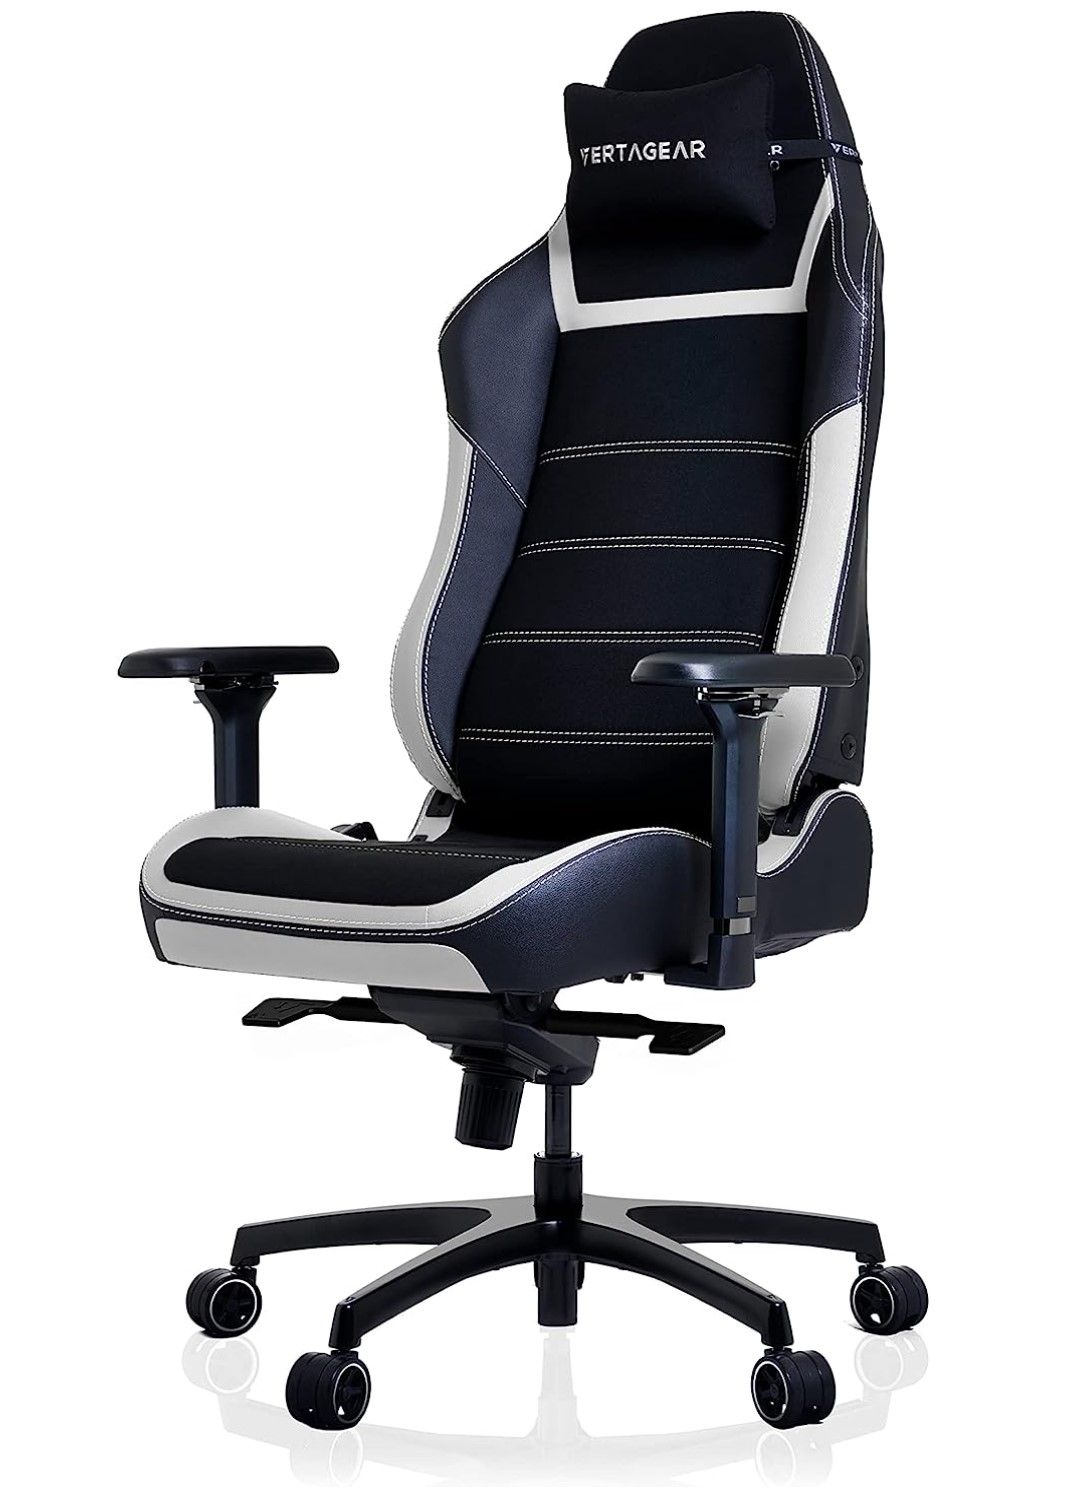 Vertagear PL6800 Big and Tall Gaming Chair